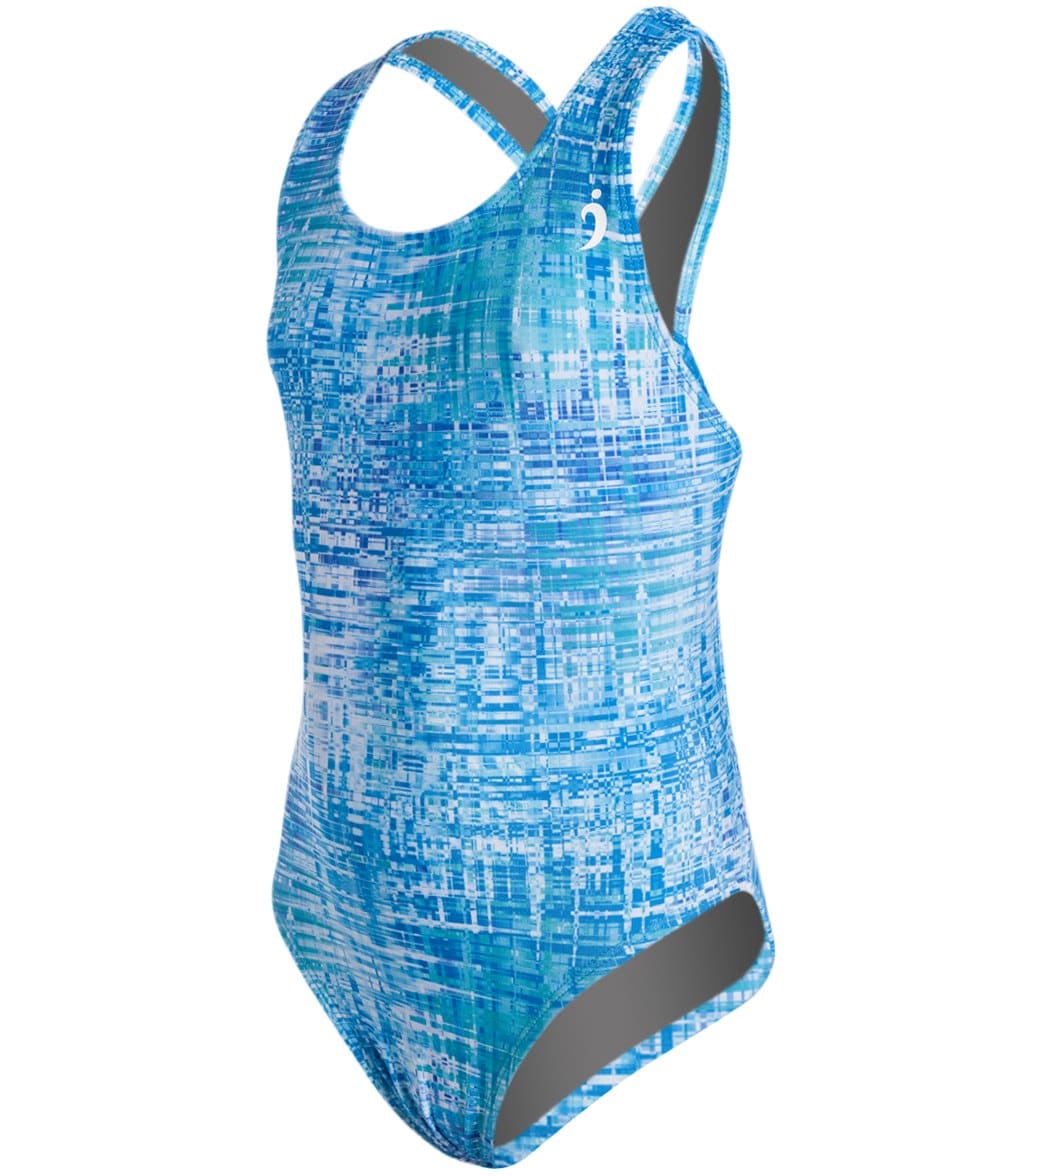 Illusions Activewear Soundwaves Youth Race Back One Piece Swimsuit - Multi 5 - Swimoutlet.com